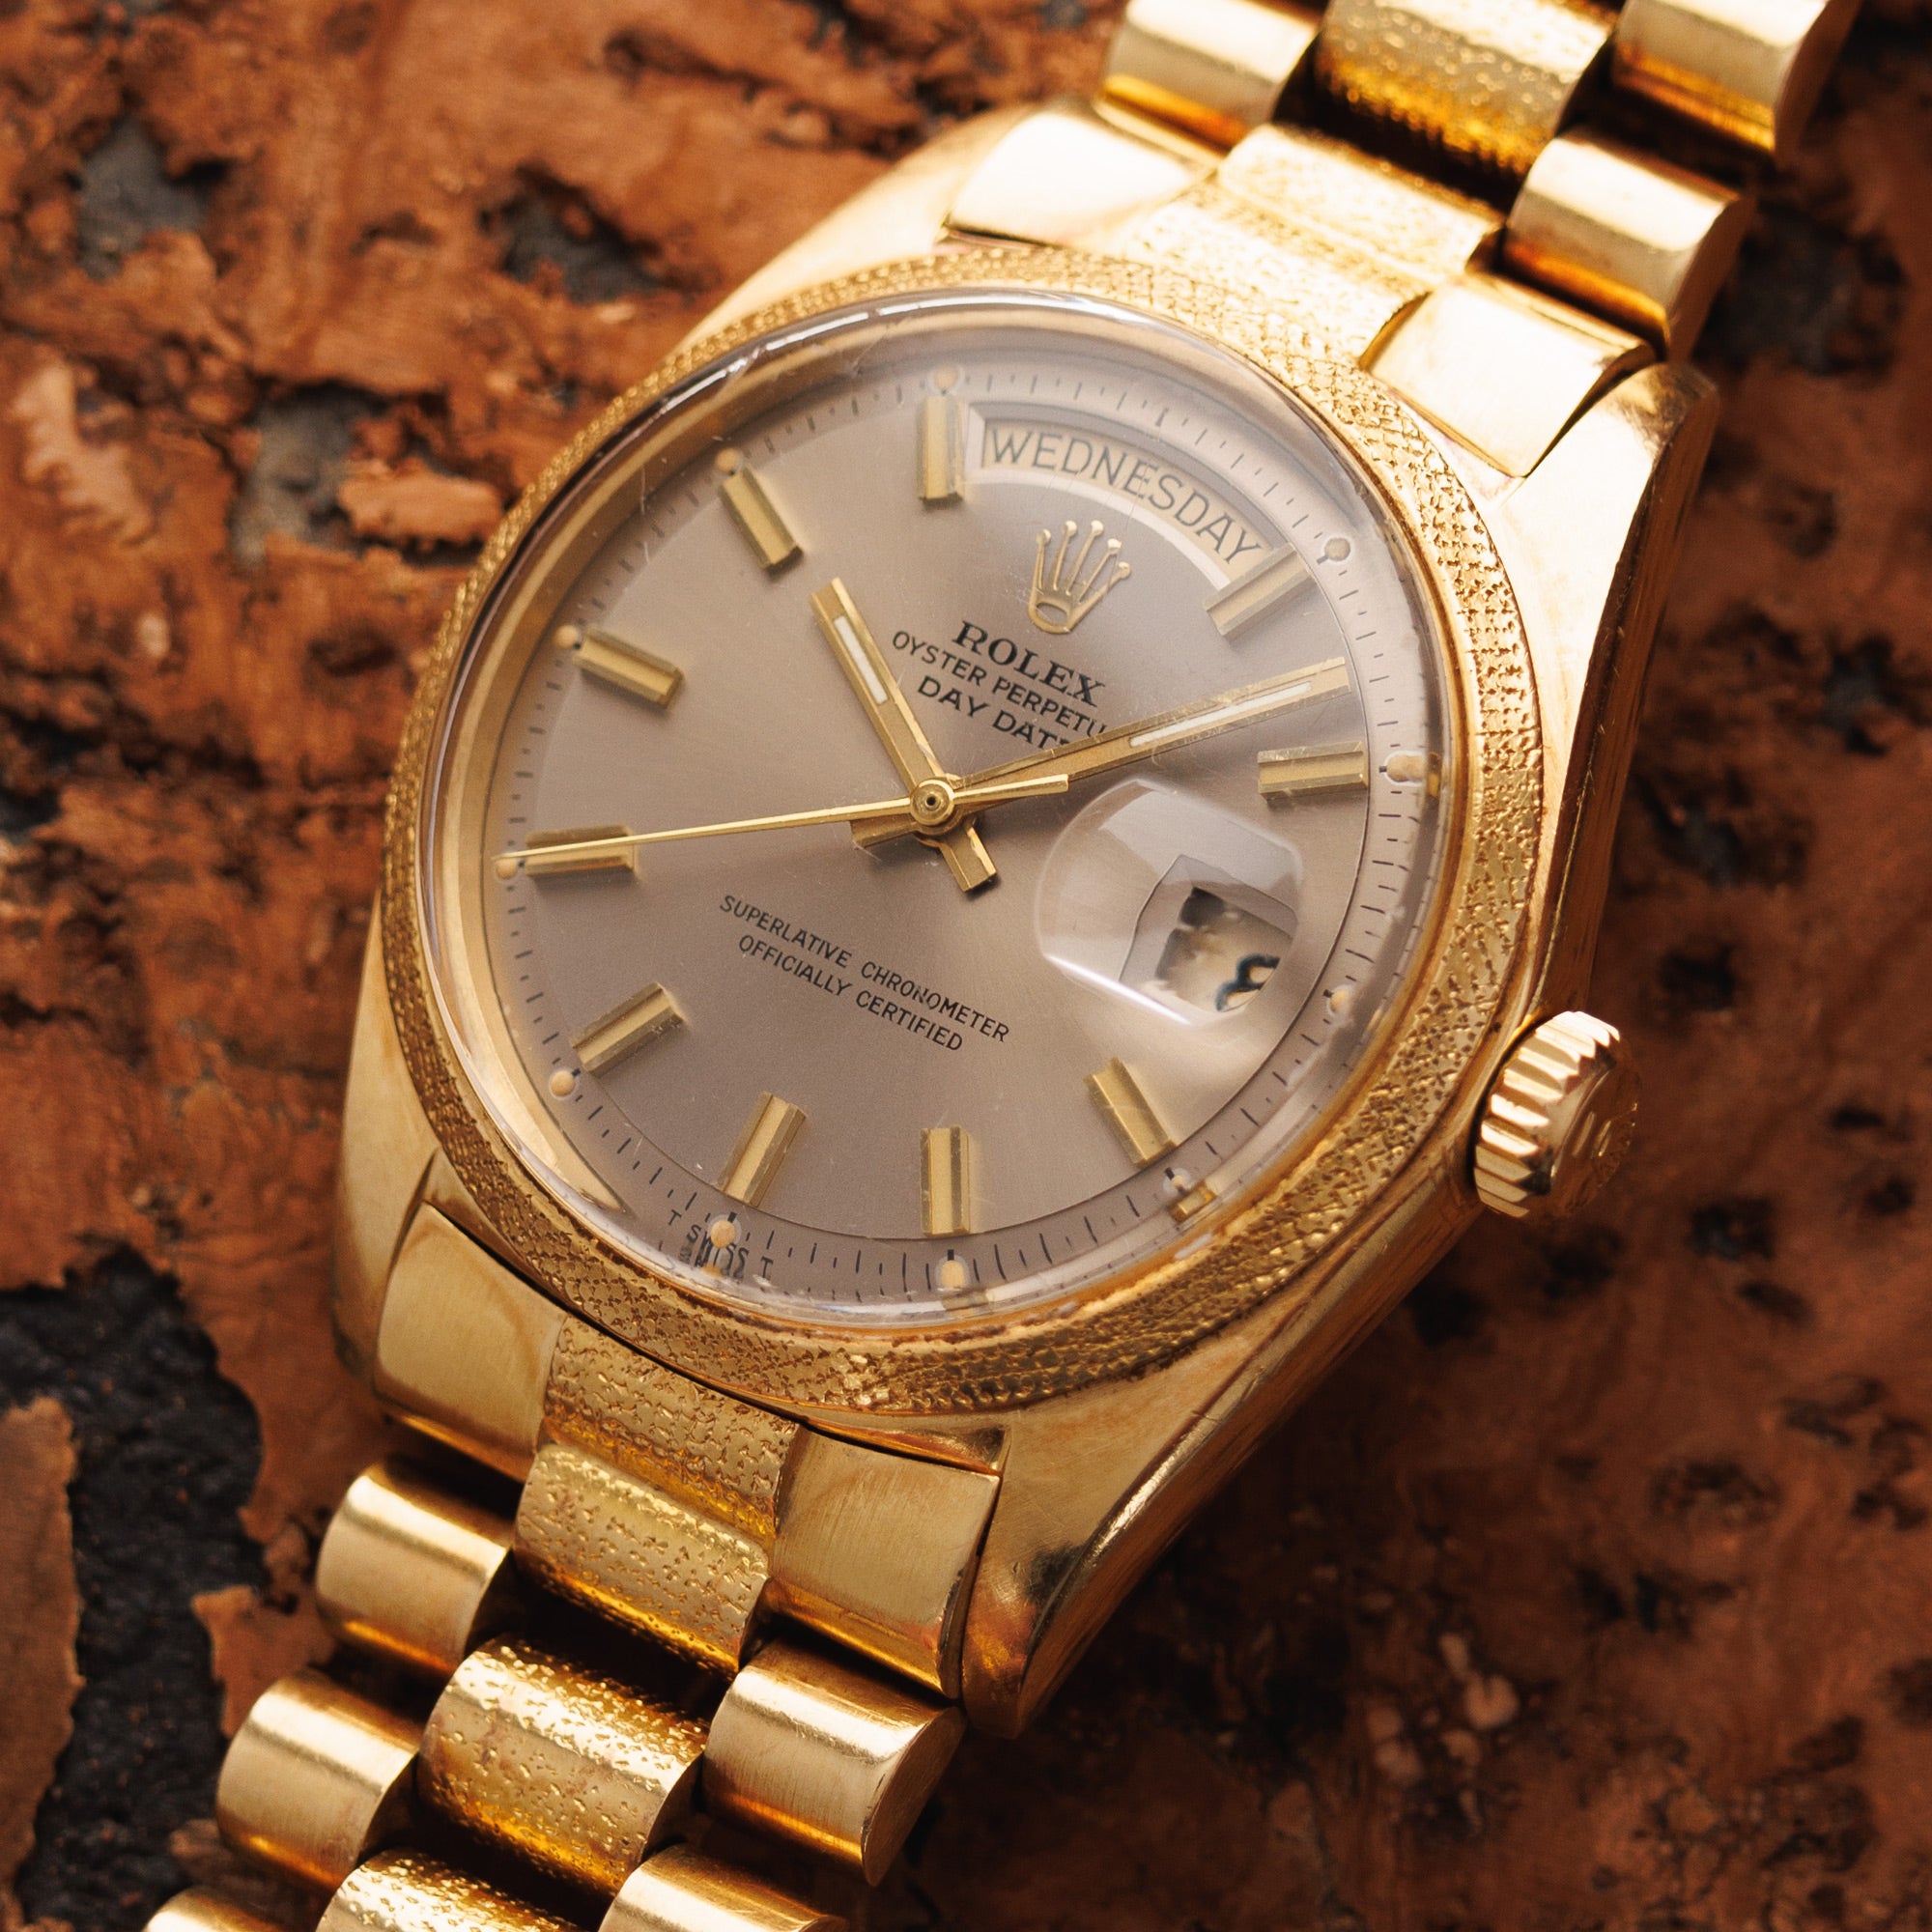 Rolex Yellow Gold Day-Date with Morelli Finish Ref. 1811